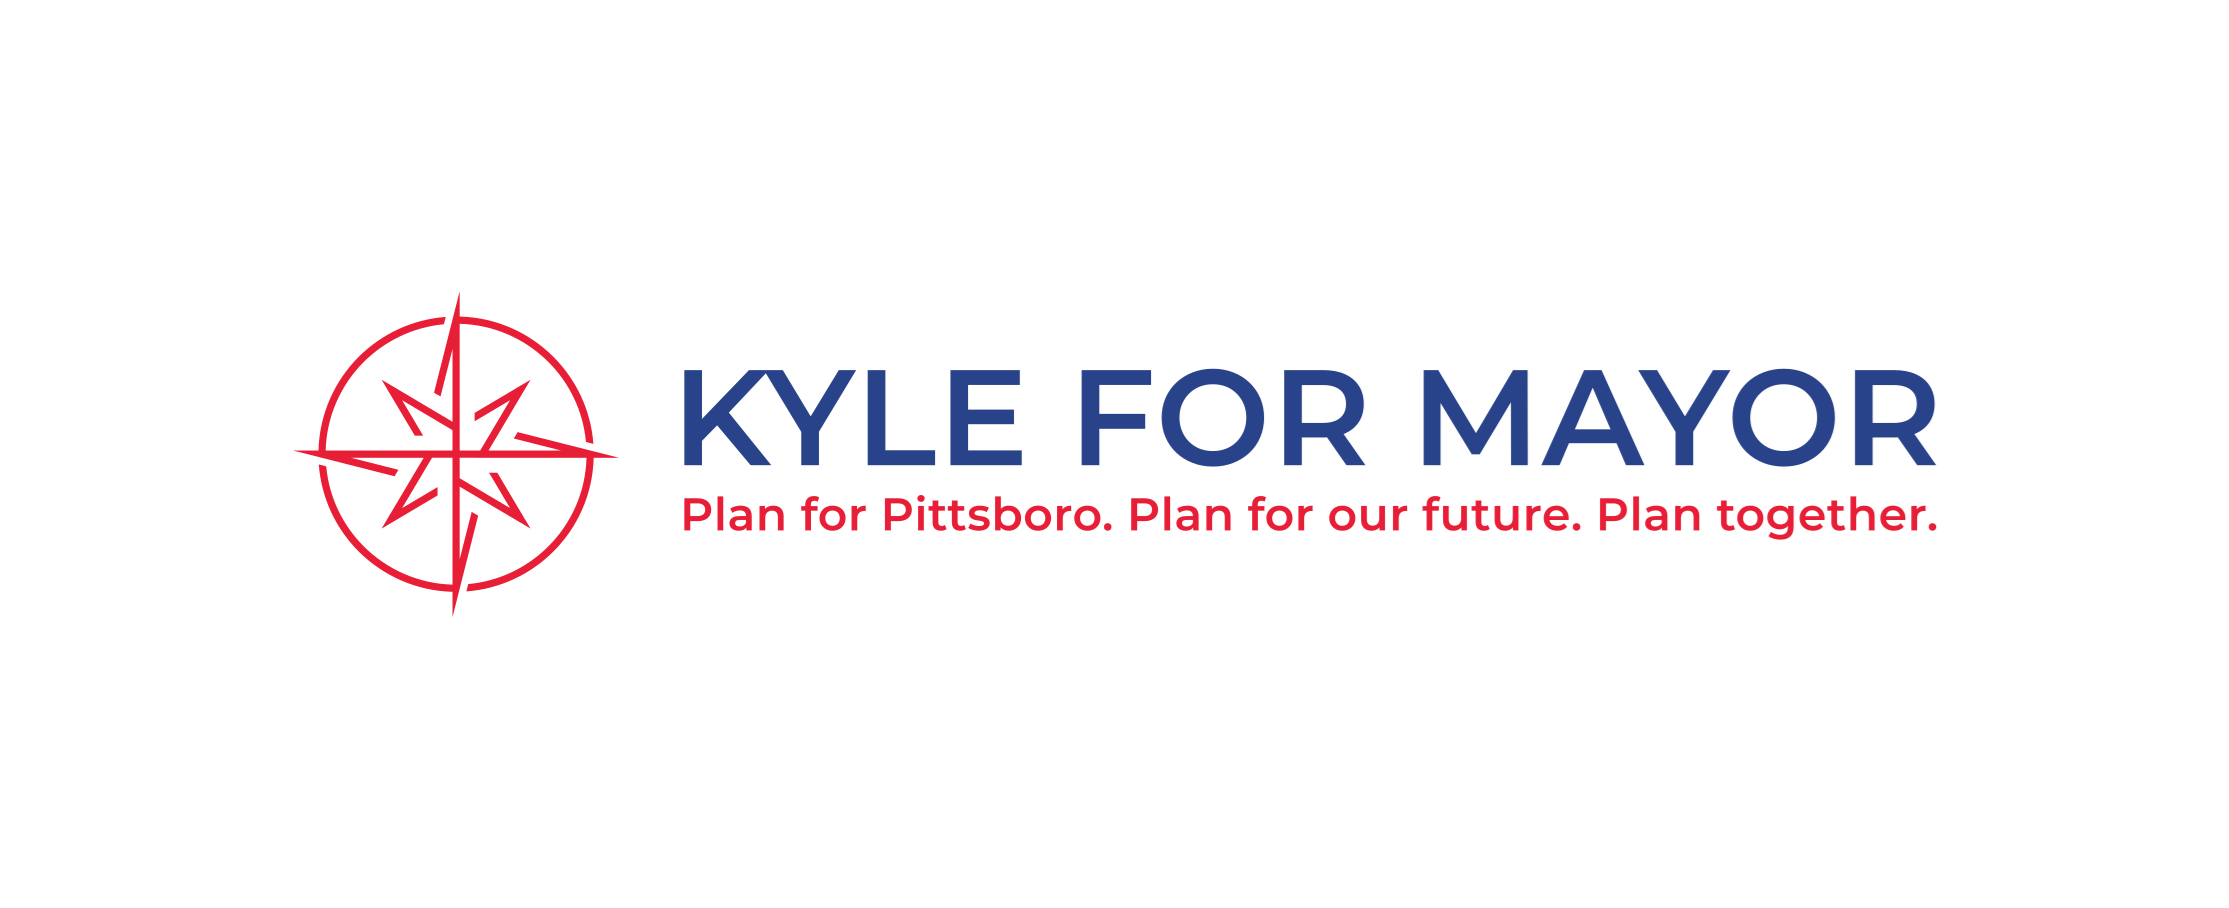 Kyle for Mayor